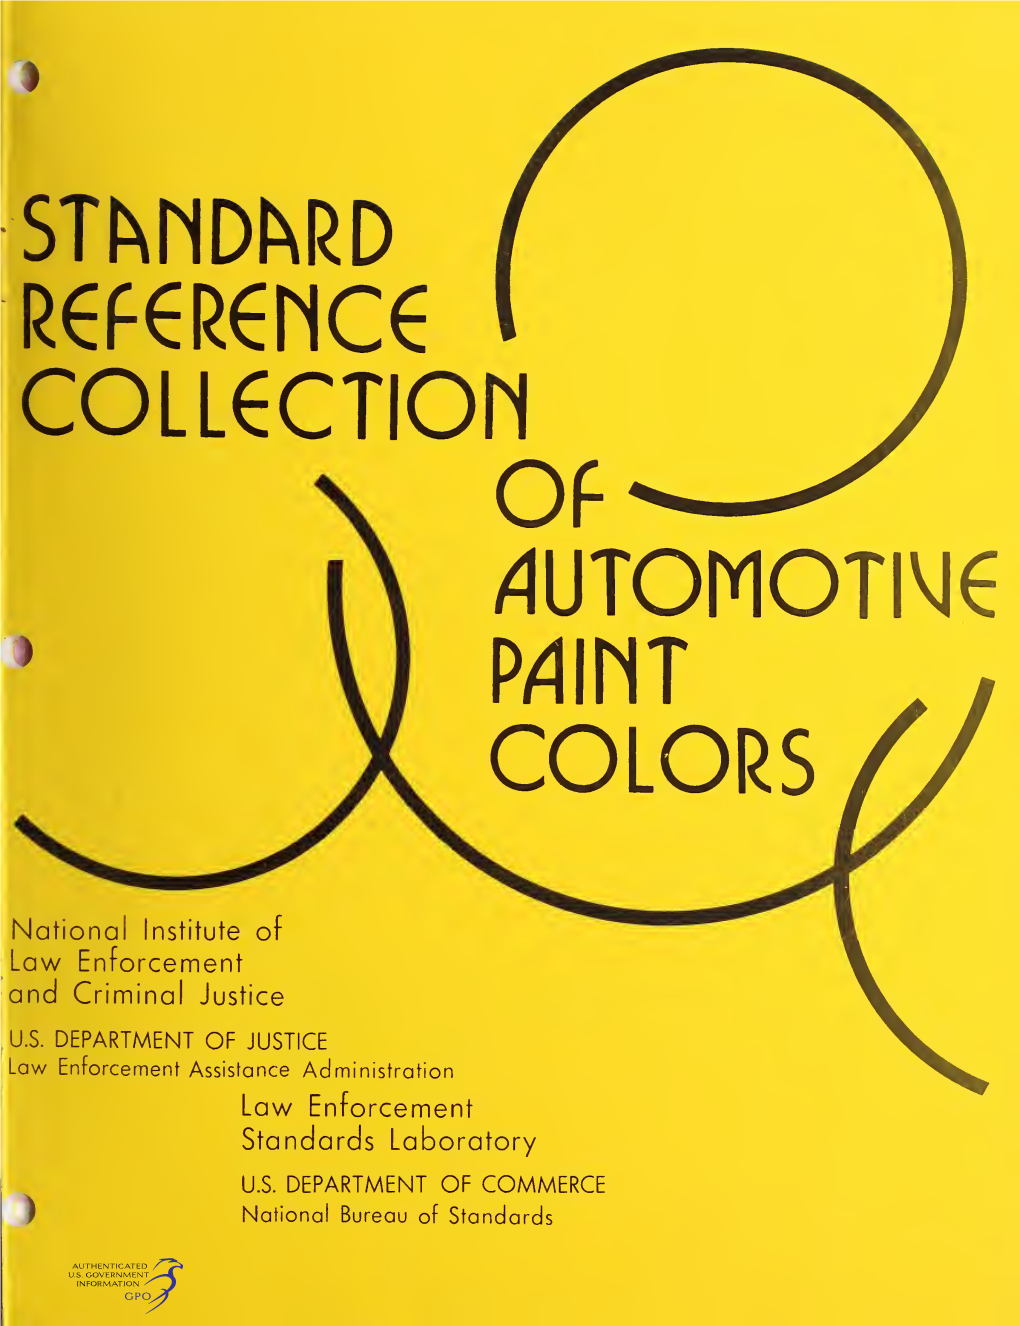 Standard Reference Collection of Automotive Paint Colors V/Ere Prepared from Actual Production Paint Batches